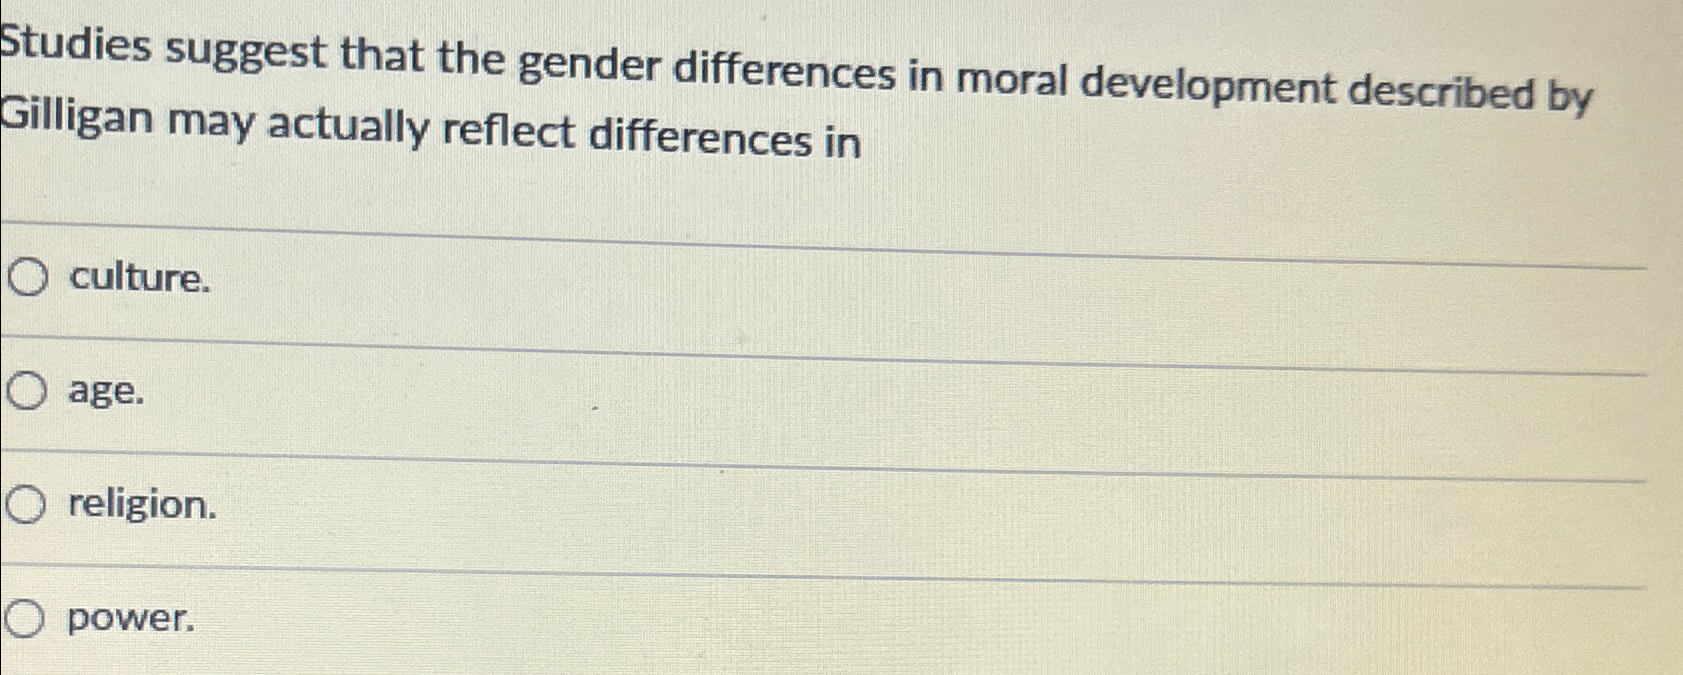 research findings on gender differences in moral reasoning suggest